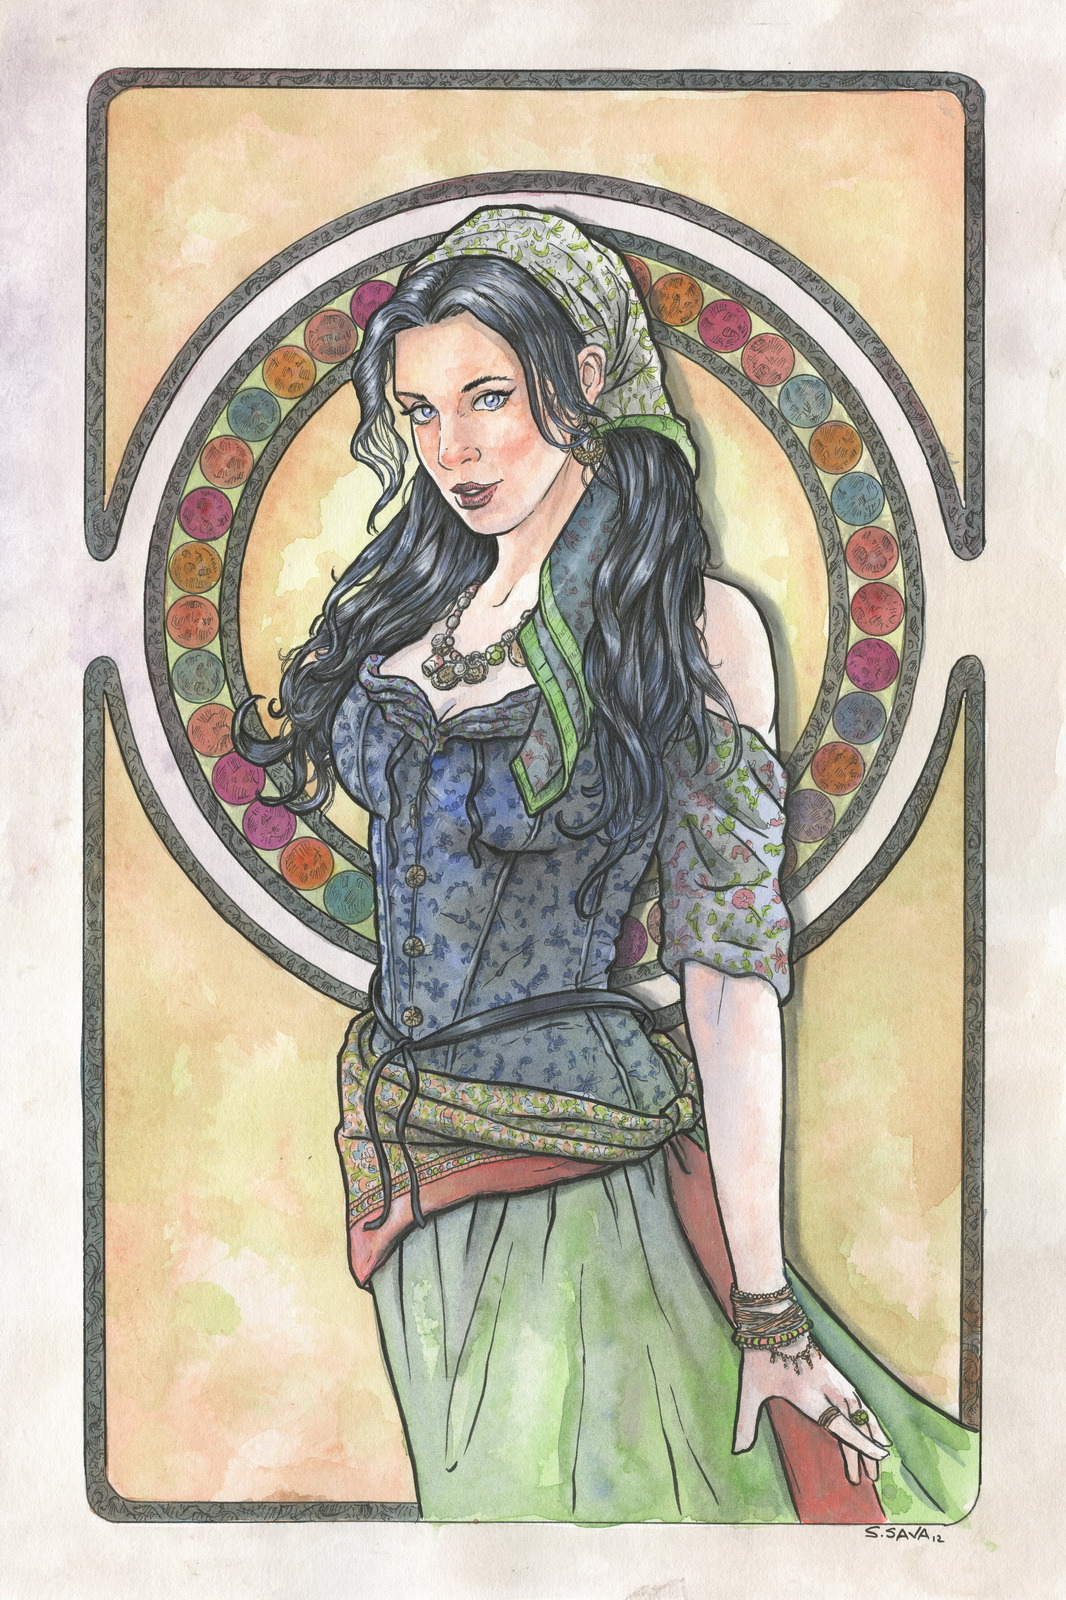 This is the 10th Art Nouveau/Alphonse Mucha inspired watercolor painting I’ve done this year.
The painting is on 12x18 Canson watercolor paper. Done in watercolors and ink.
Photo reference/inspiration can be seen here…
http://faestock.deviantart.com/gallery/?offset=288#/d57o5tz
Original paintings can be purchased here…
http://www.etsy.com/shop/ScottChristianSava?section_id=11821287
and Limited Edition Prints can be purchased here…
http://www.etsy.com/shop/ScottChristianSava?section_id=11821297
Thanks for looking!
Scott